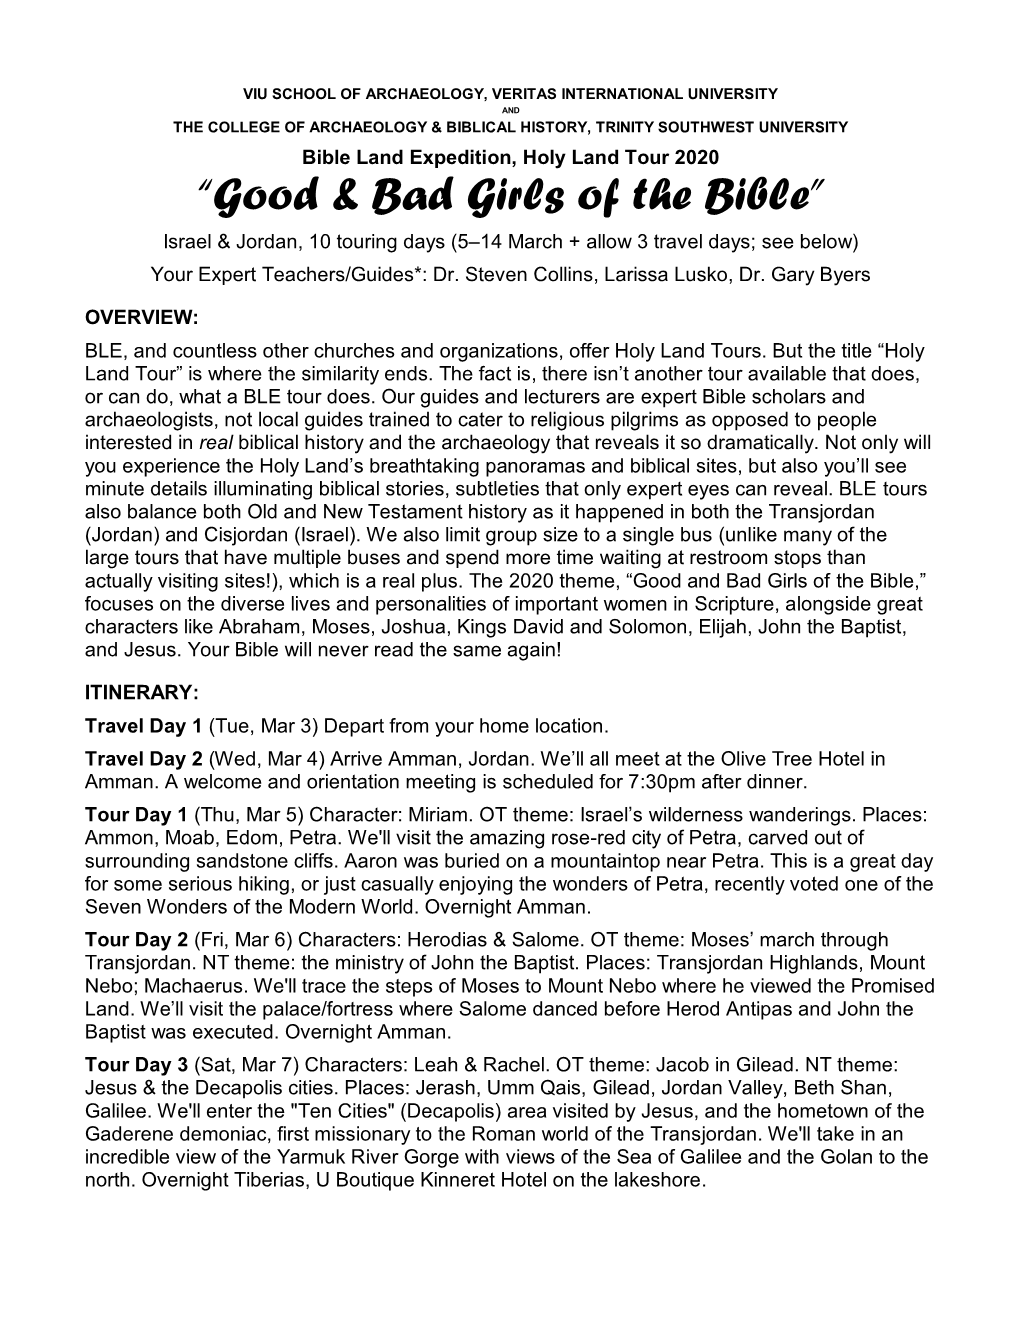 “Good & Bad Girls of the Bible”